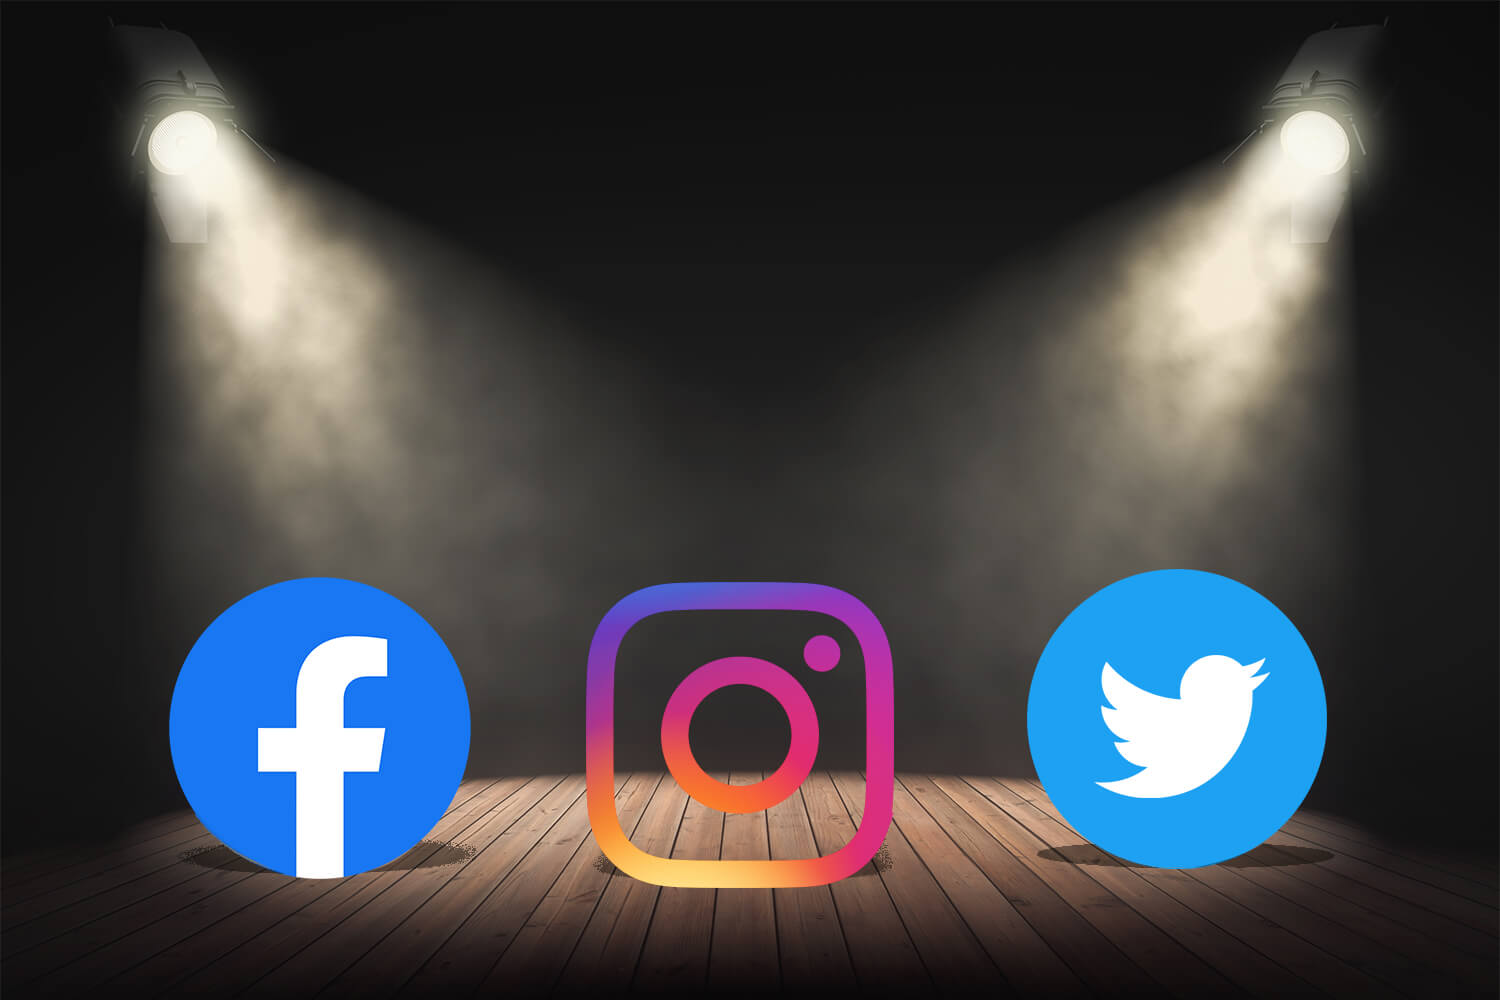 Social media icons on stage lit by two spotlights